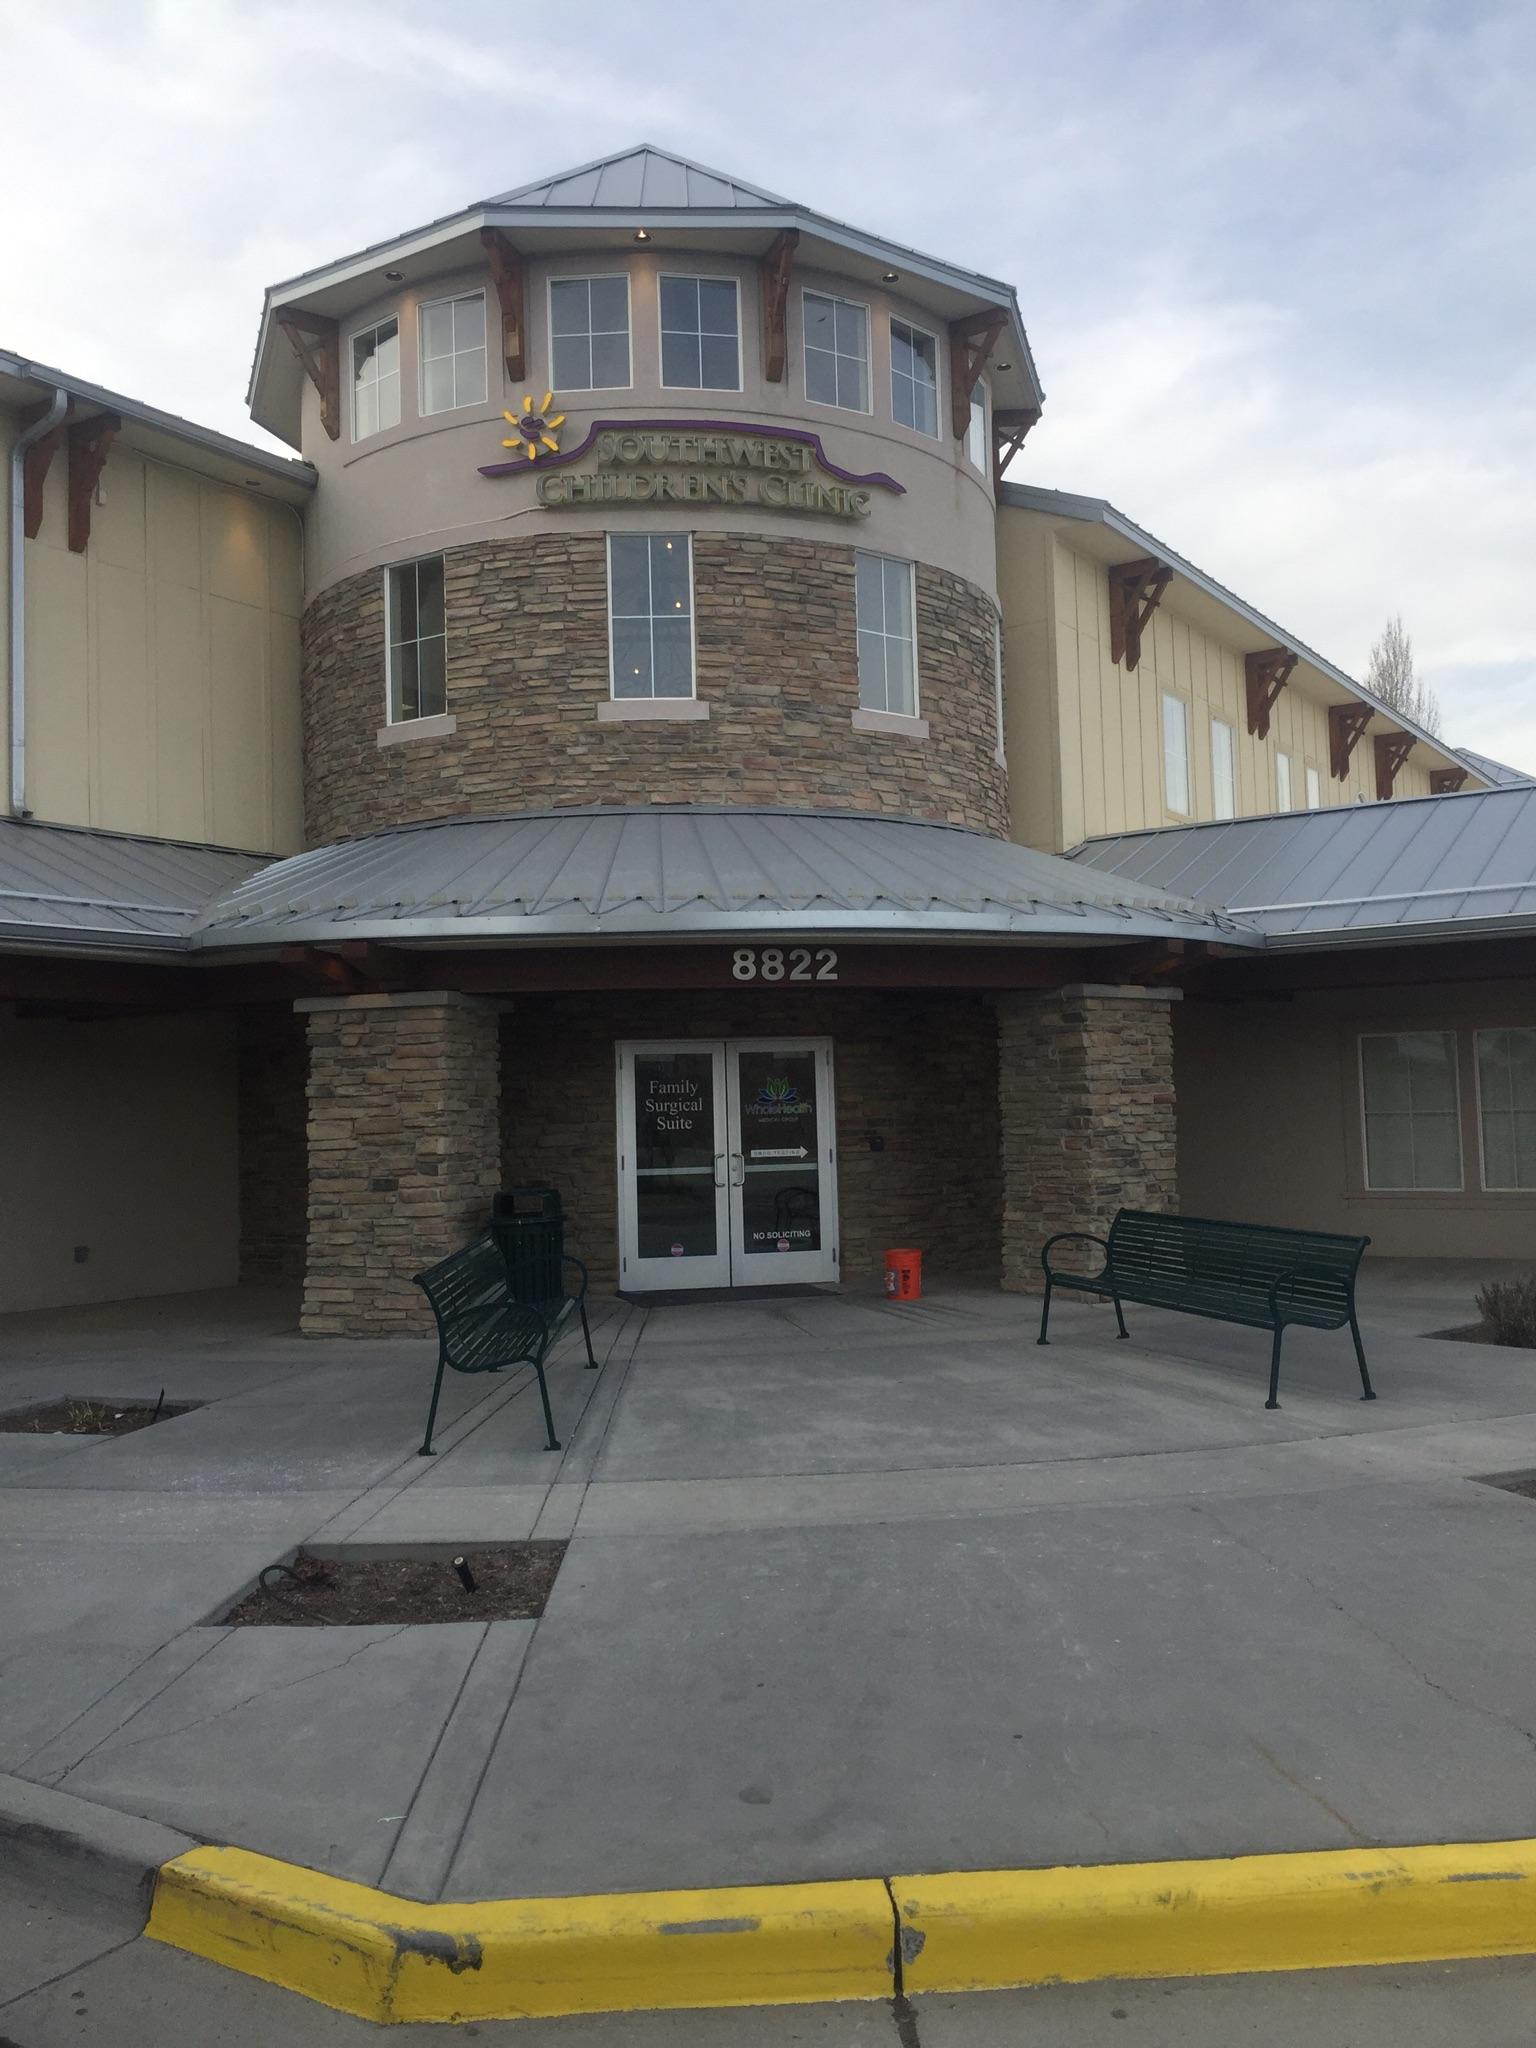 We are located at 8822 S. Redwood Rd. Ste. C-212, inside the Southwest Children's Clinic Building. We are the first double doors up the stairs on the right. Give us a call today to schedule an appointment. 801-388-2101.